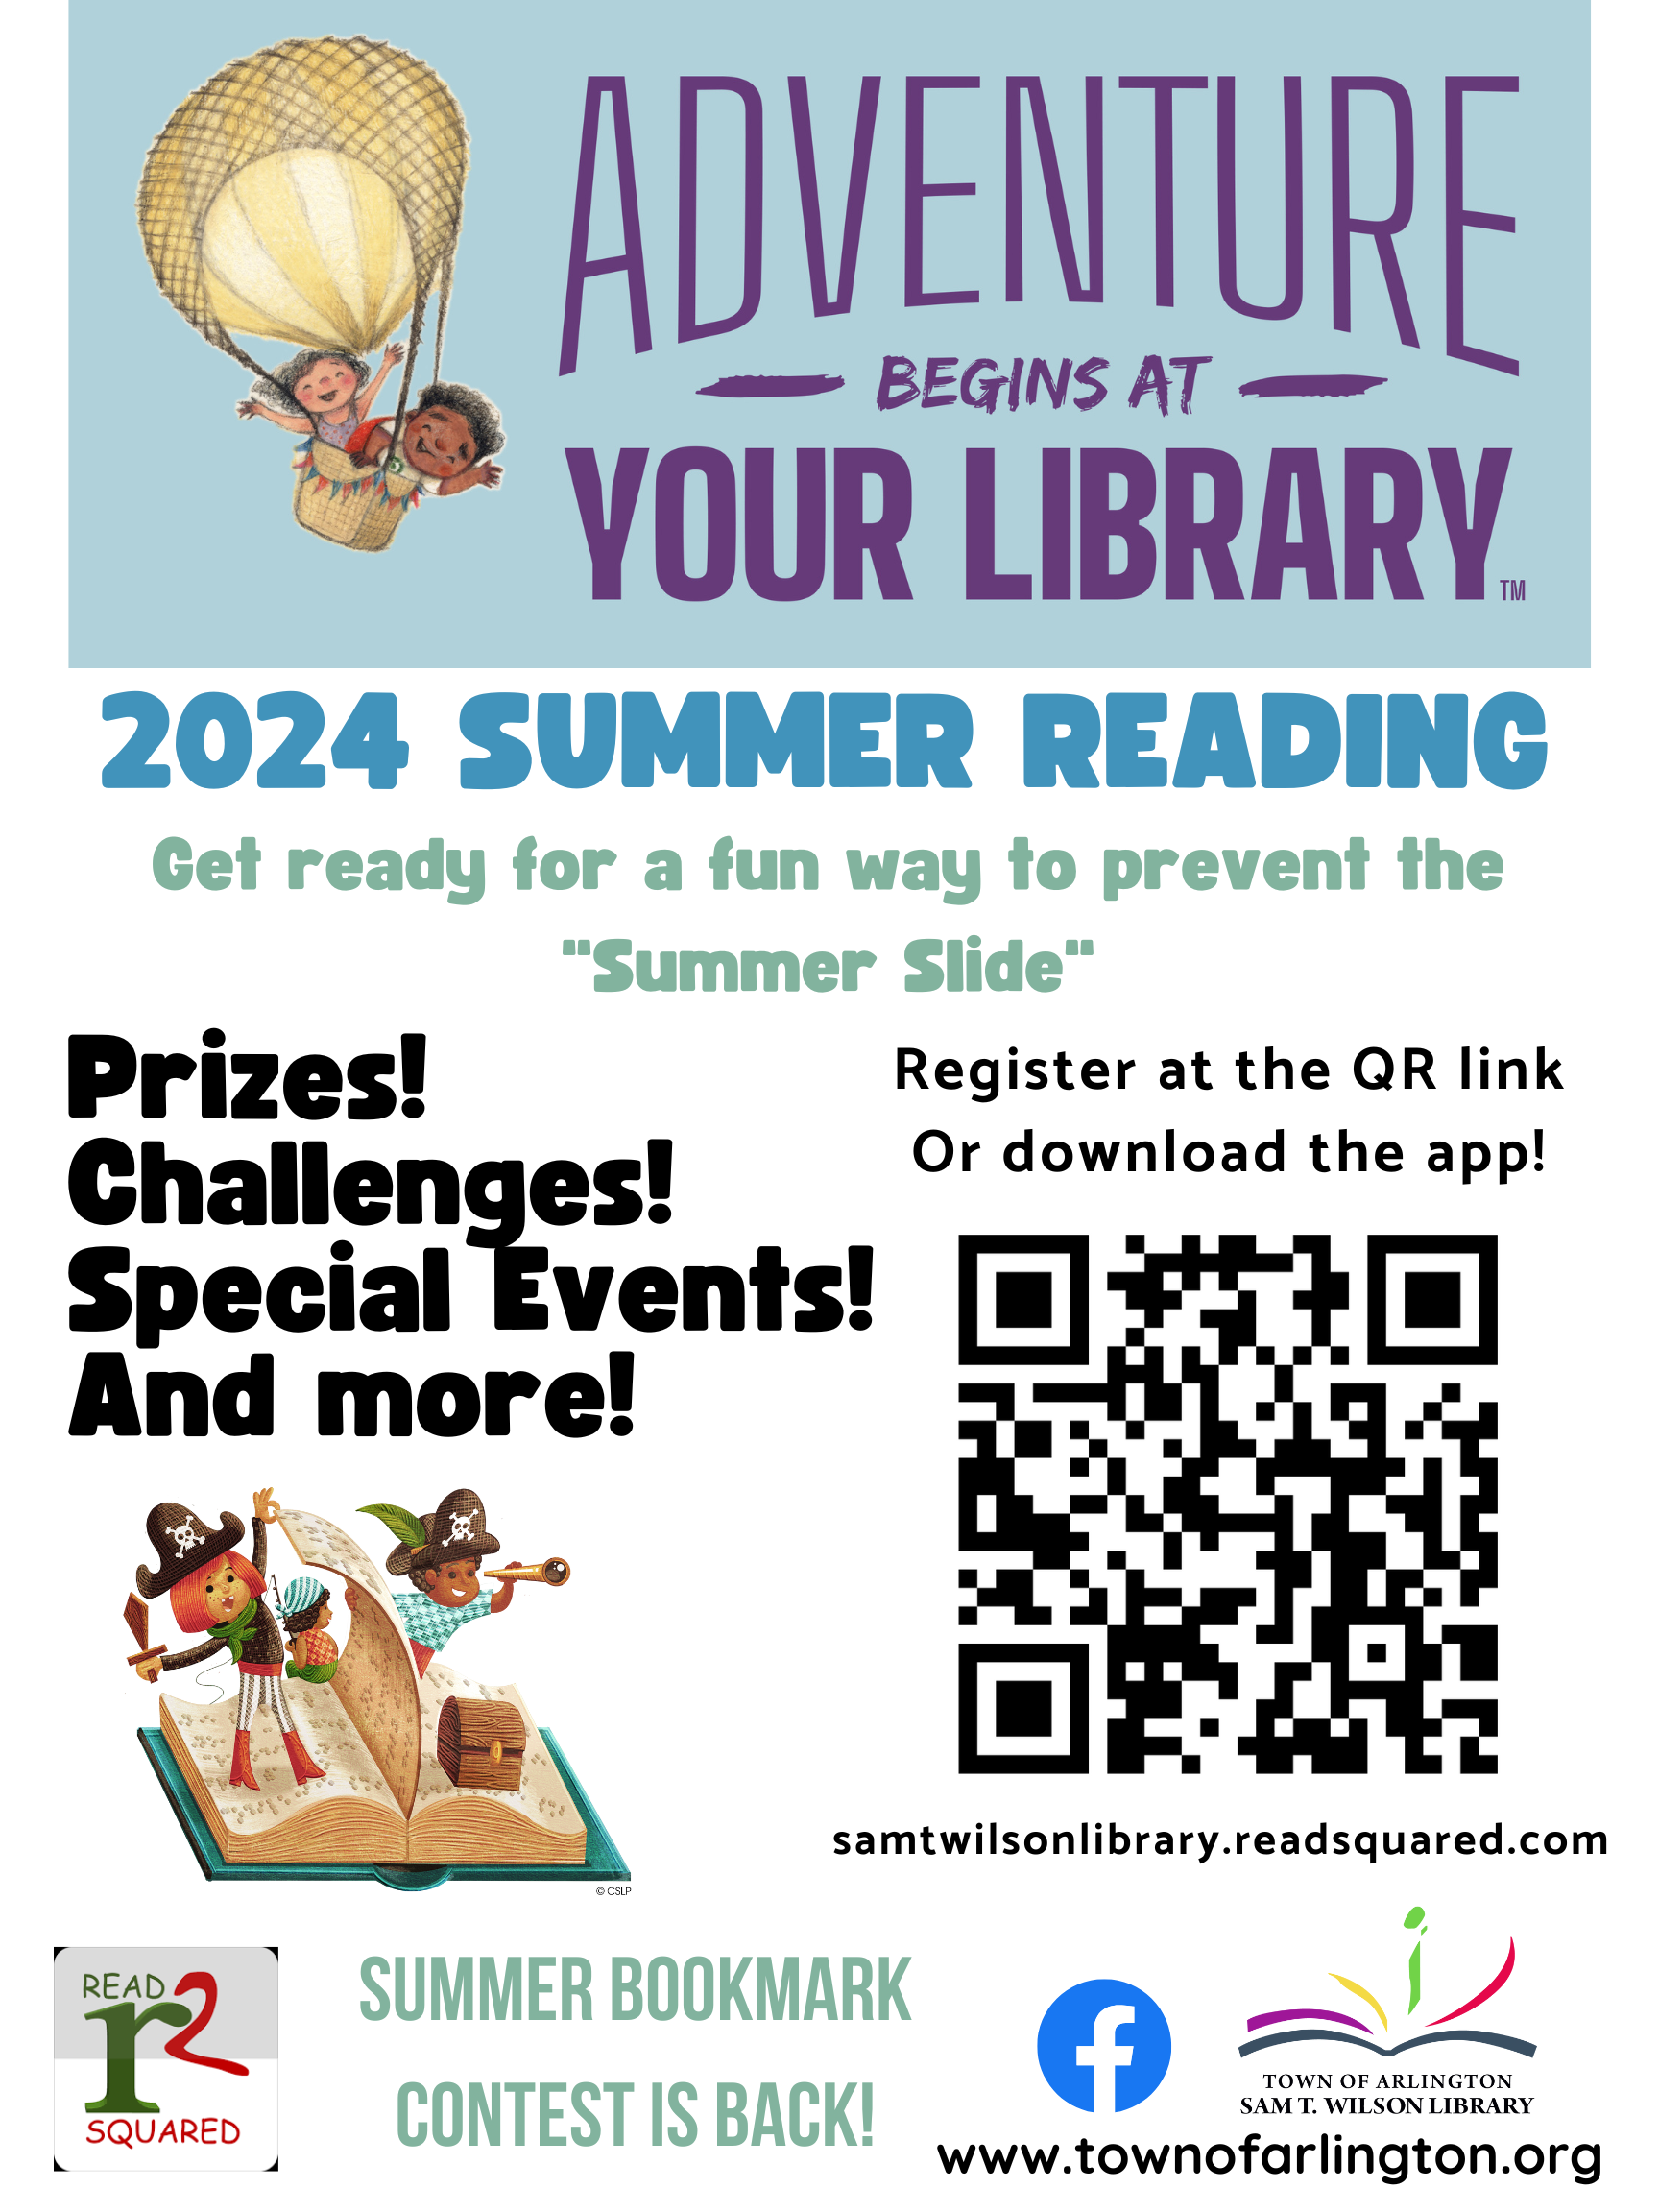 2024 Summer Reading program at the library